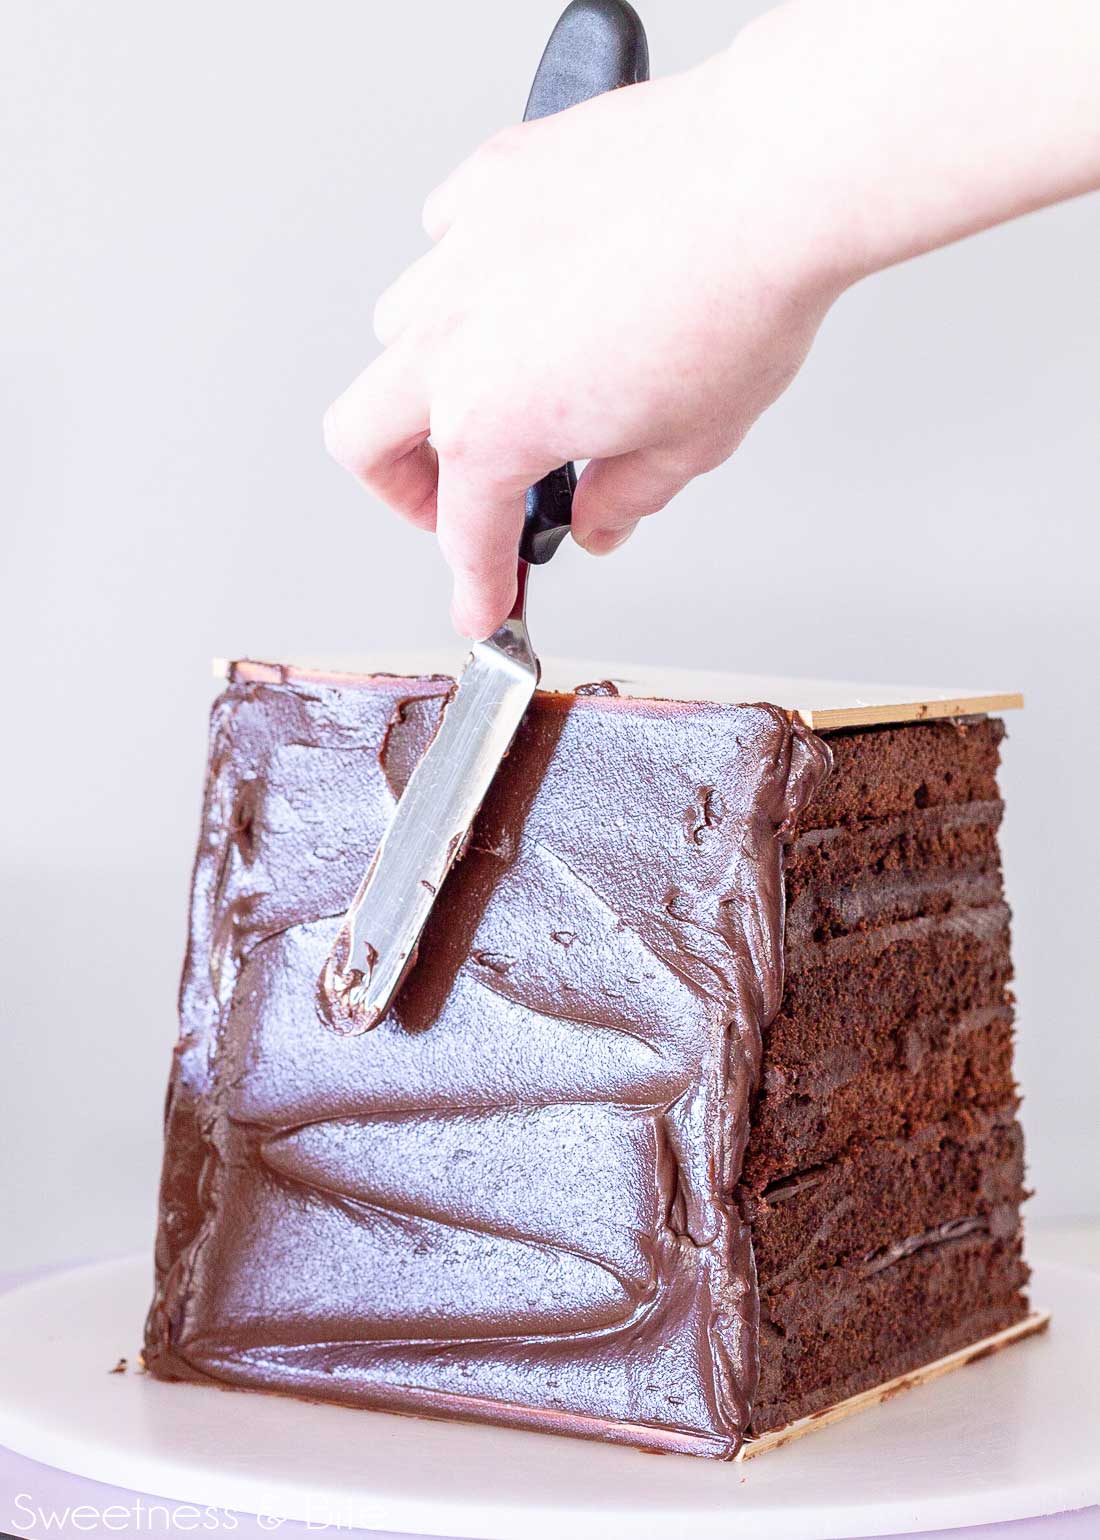 Tips for cake decorating with shaky hands - offset spatula